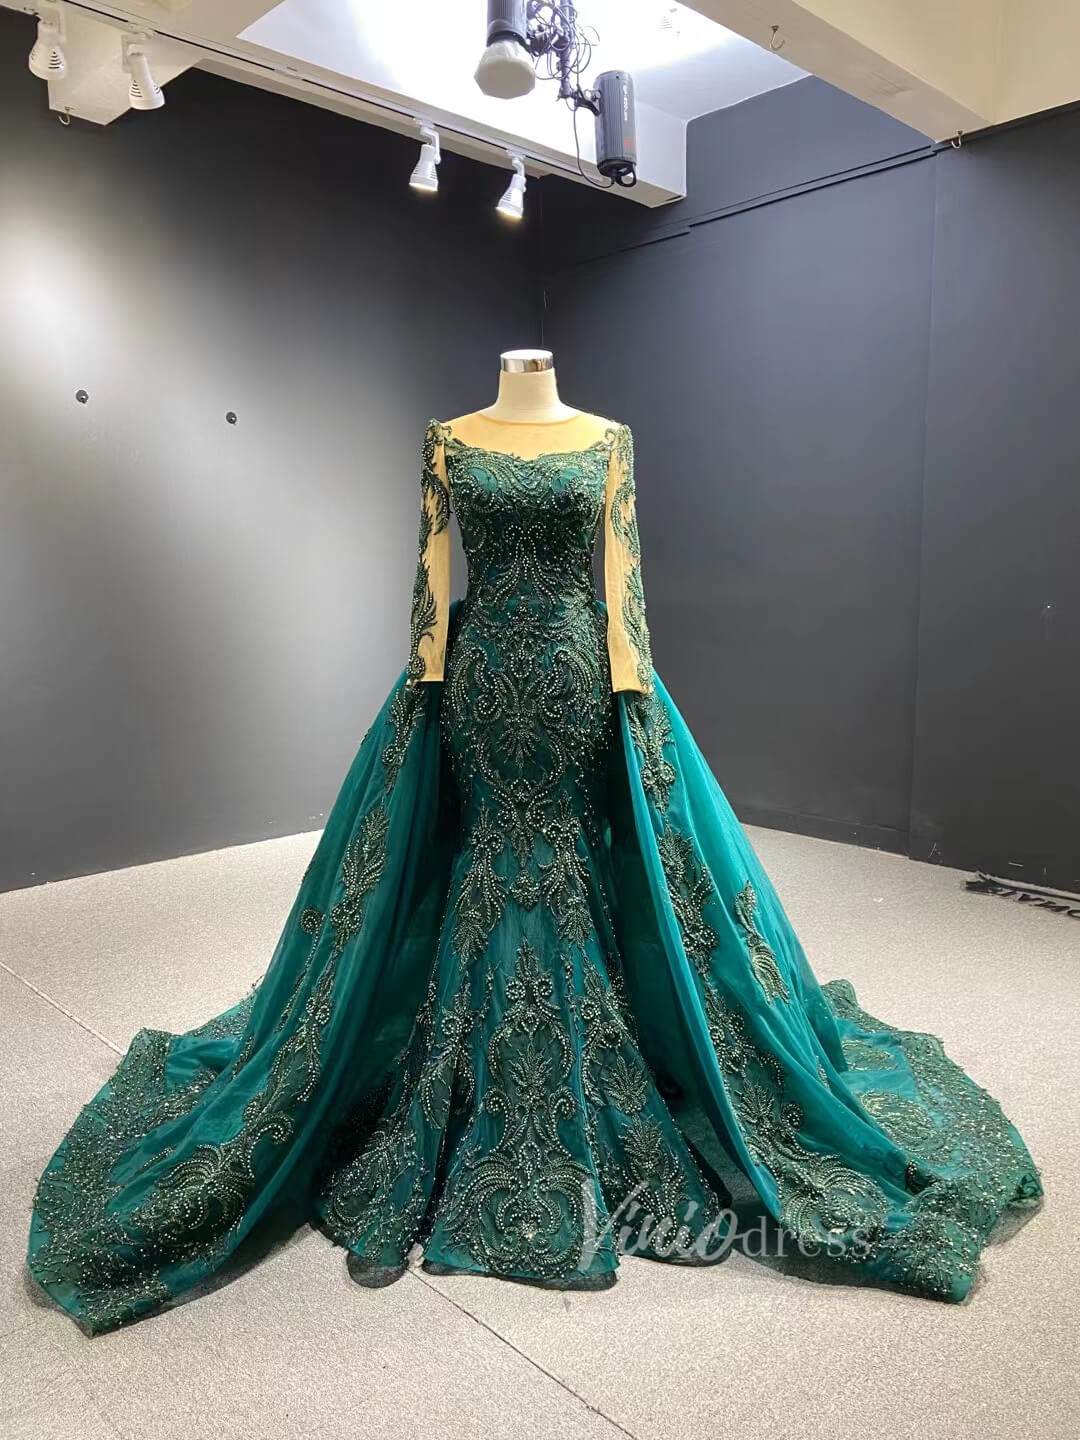 Emerald Green Lace Tiered Green Dresses For Wedding With Ruffle Tulle And  Half Sleeves Perfect For Guest, Flower Girls, Formal Evening Gowns, And  Toddlers In 2021 From Lovemydress, $44.63 | DHgate.Com